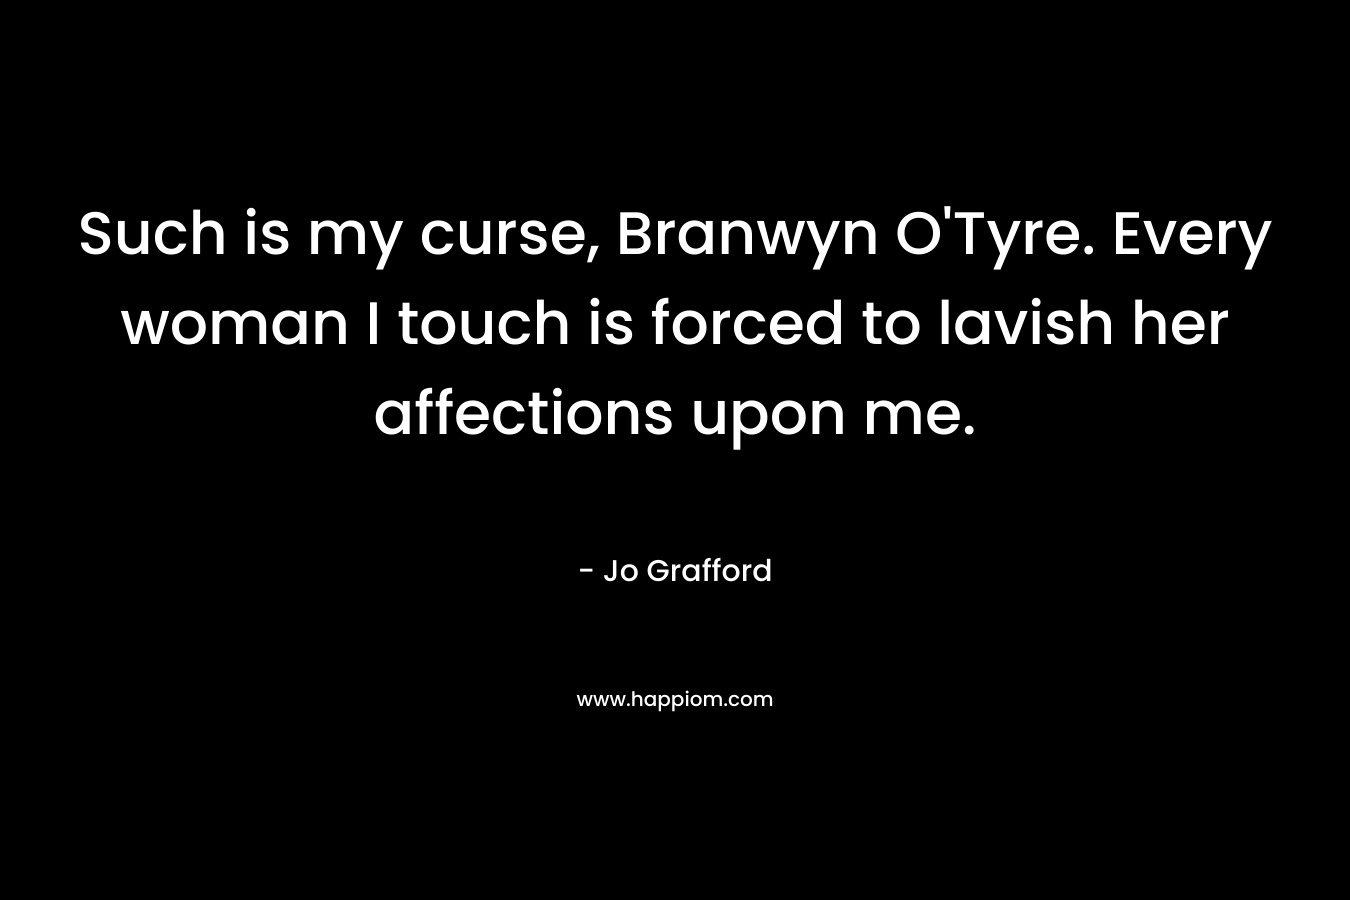 Such is my curse, Branwyn O’Tyre. Every woman I touch is forced to lavish her affections upon me. – Jo Grafford